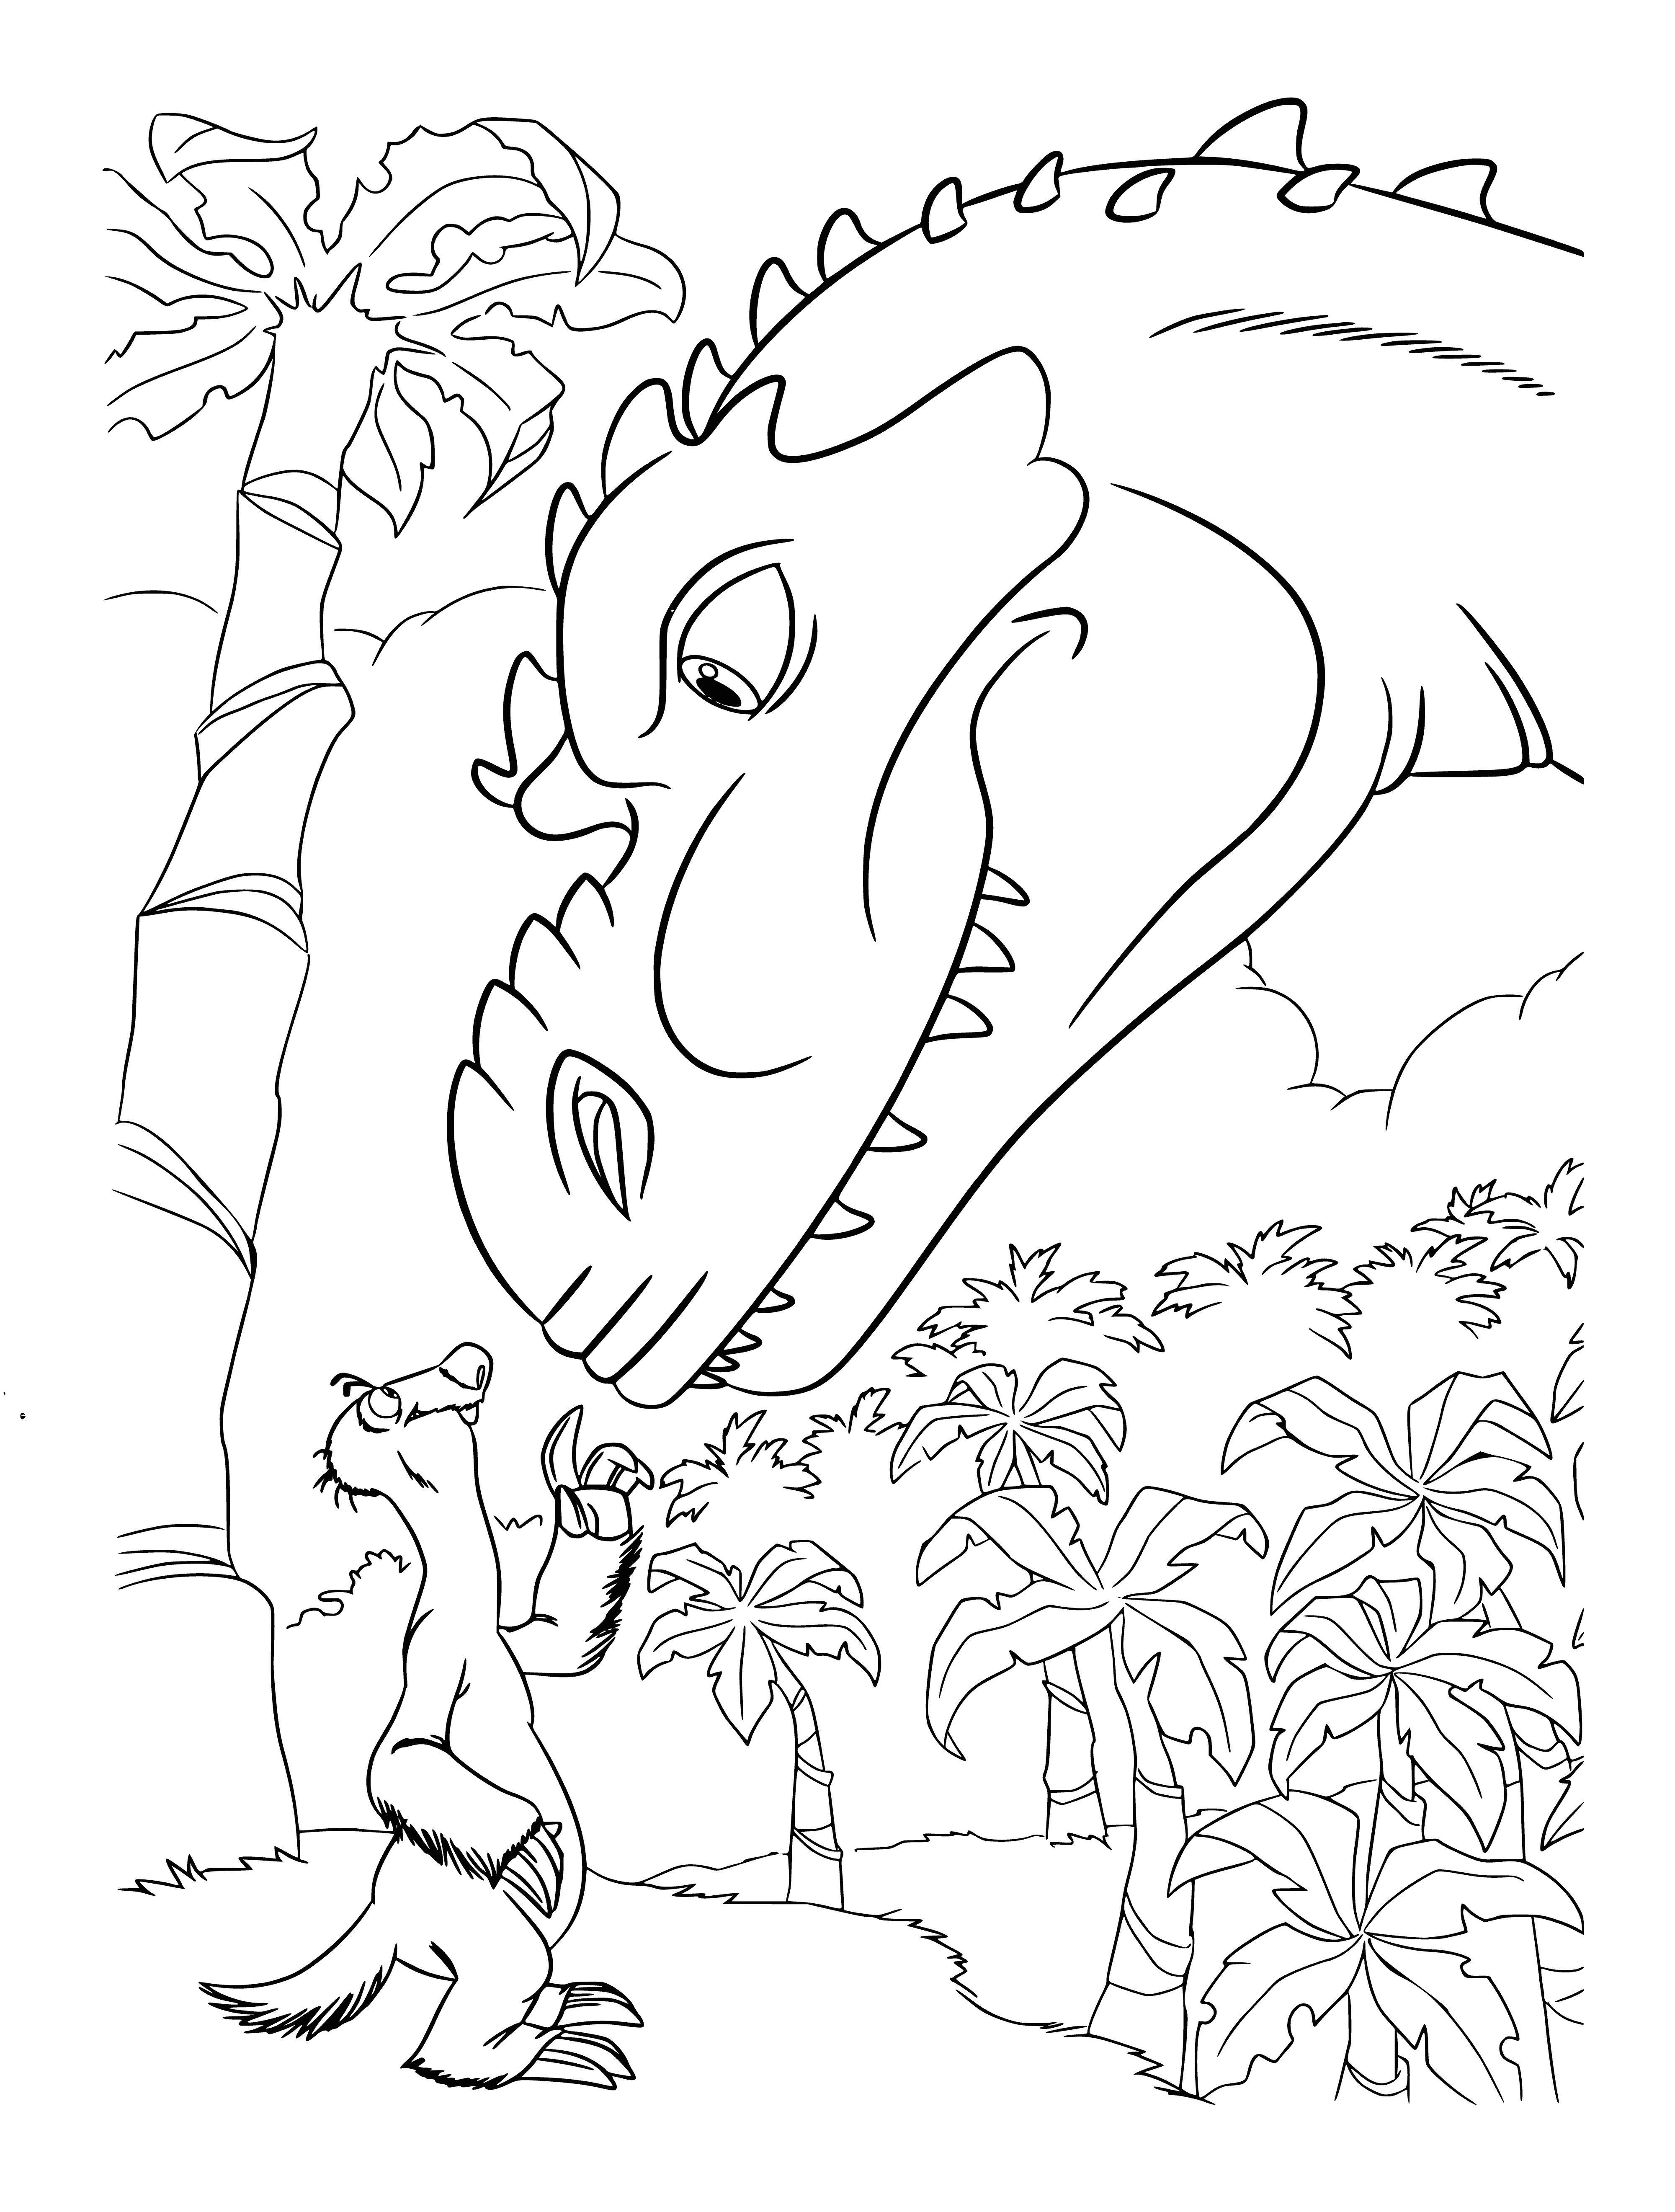 coloring page: Sid & a long-necked dino buddy explore a field illuminated by a sunny sky.